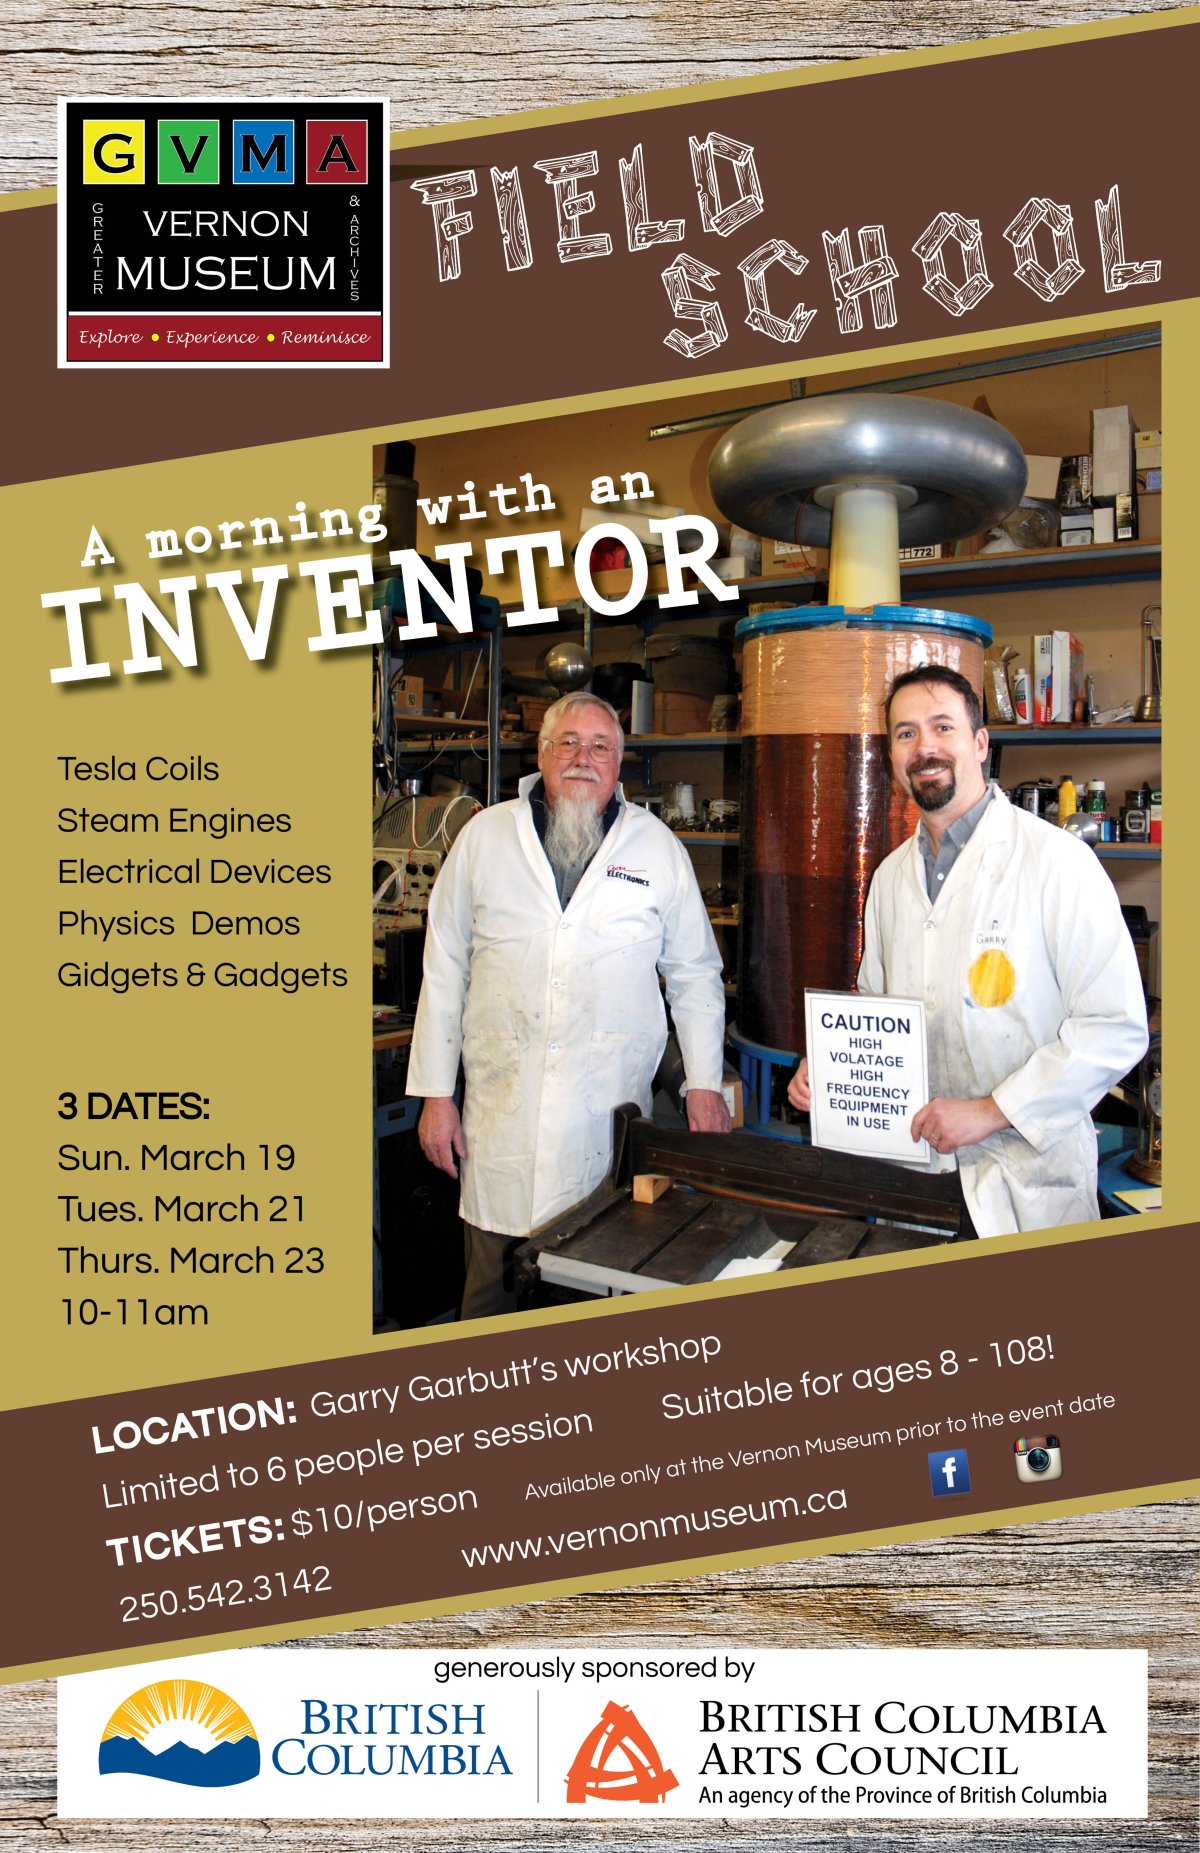 A morning with an Inventor - image